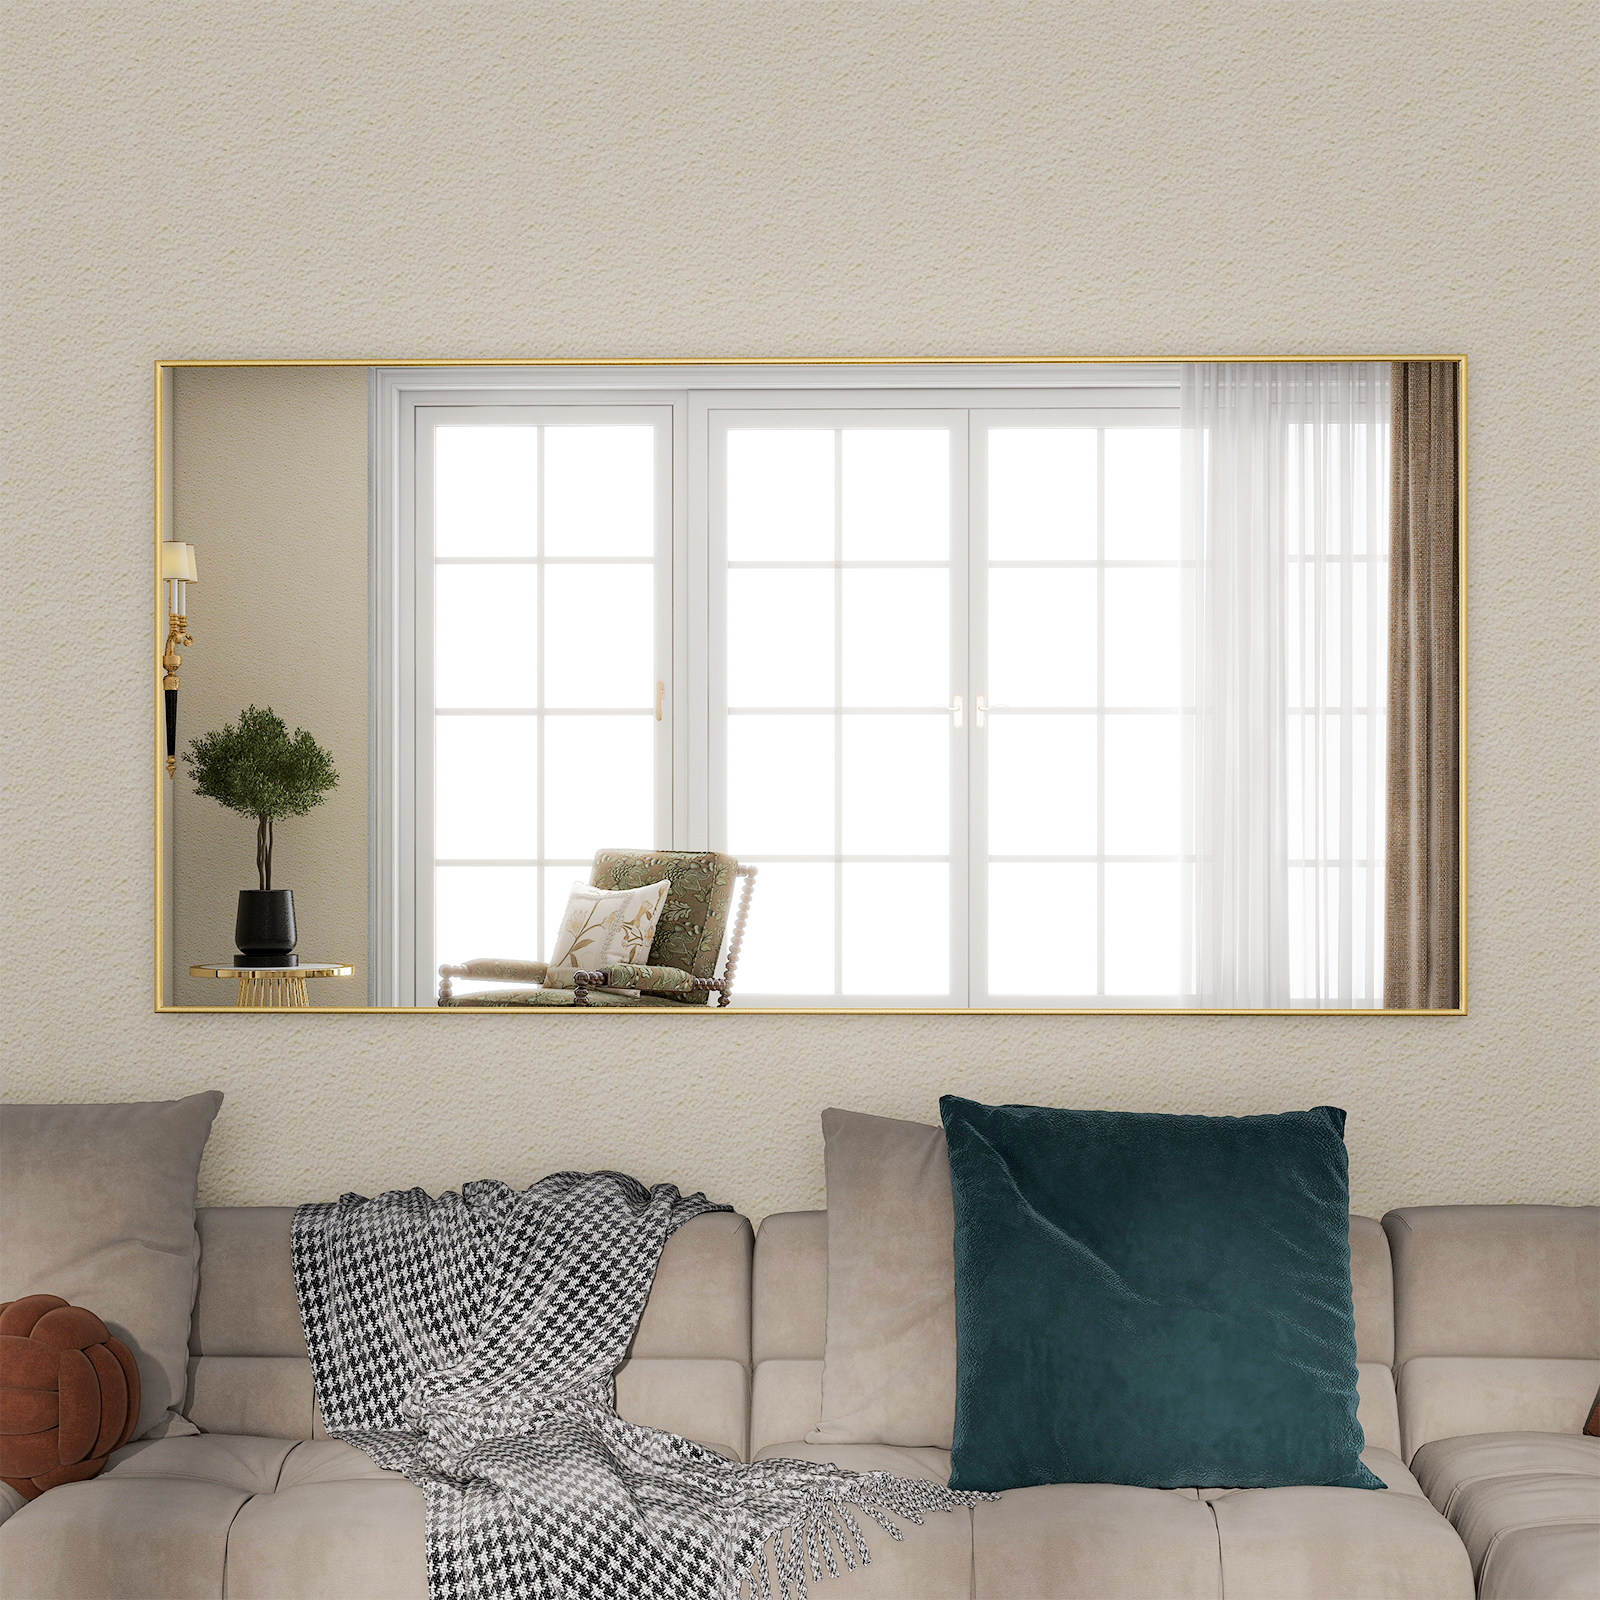 BEAUTYPEAK 76"x34" Full Length Mirror Rectangle Floor Mirrors for Standing Leaning or Hanging, Gold - image 3 of 6